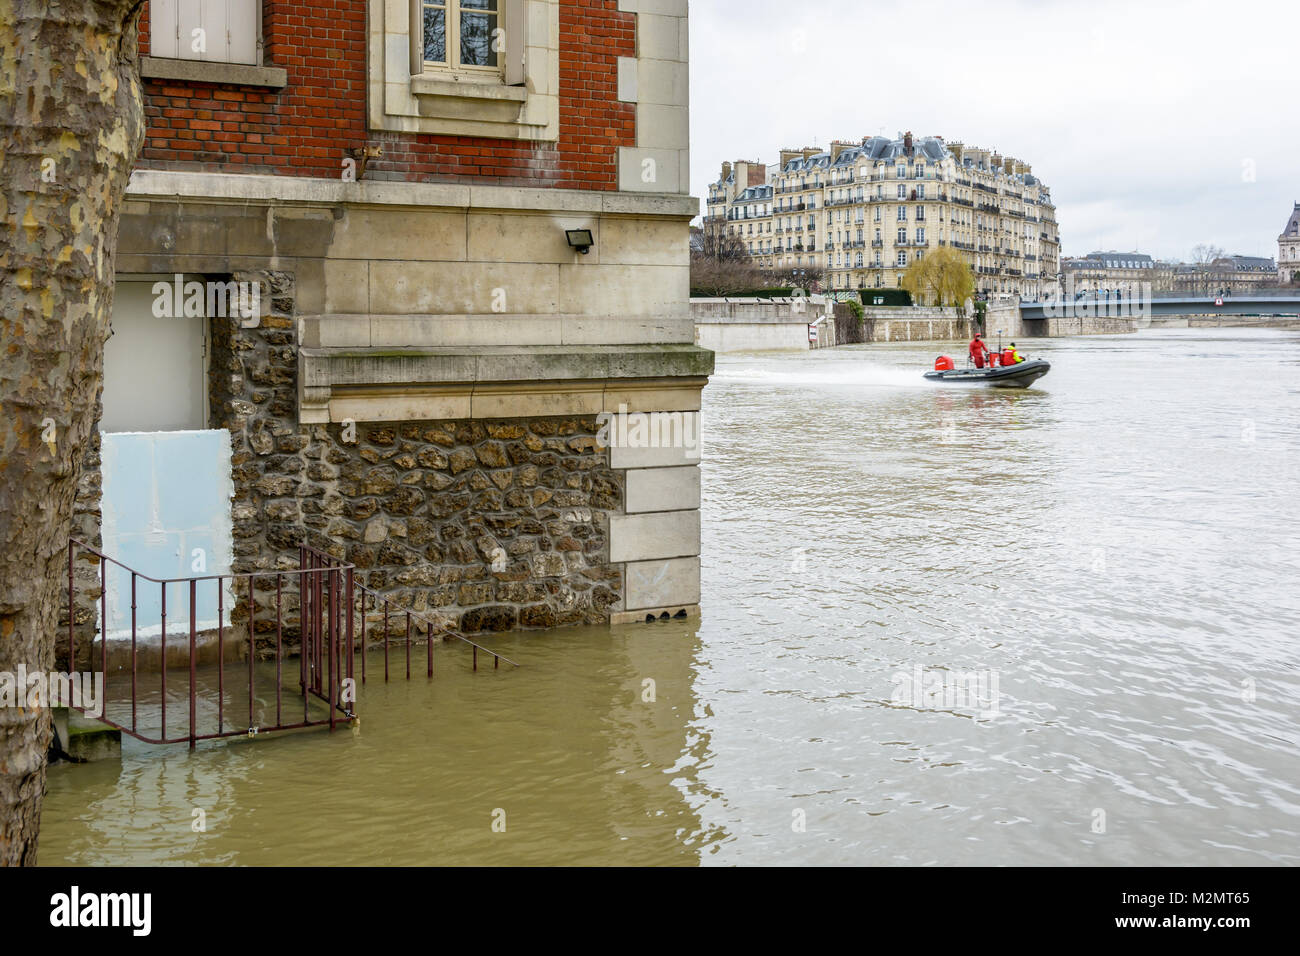 Paris, France - January 29, 2018: Divers from the Paris Fire Brigade on a motorboat pass at full speed in front of a brick house half-submerged by the Stock Photo